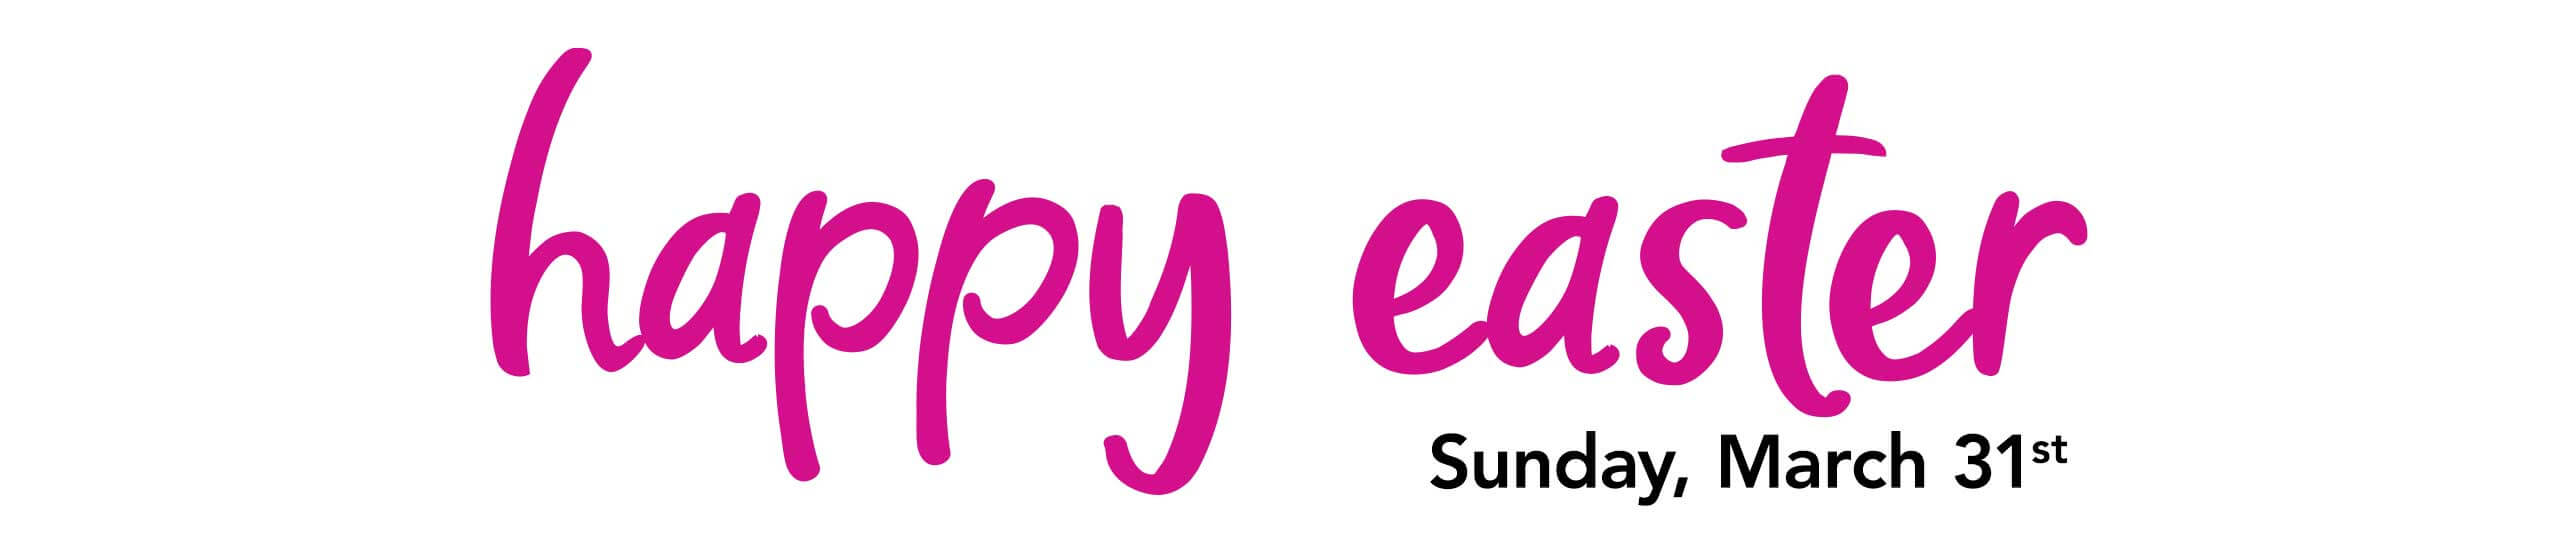 Happy Easter - Sunday, March 31st